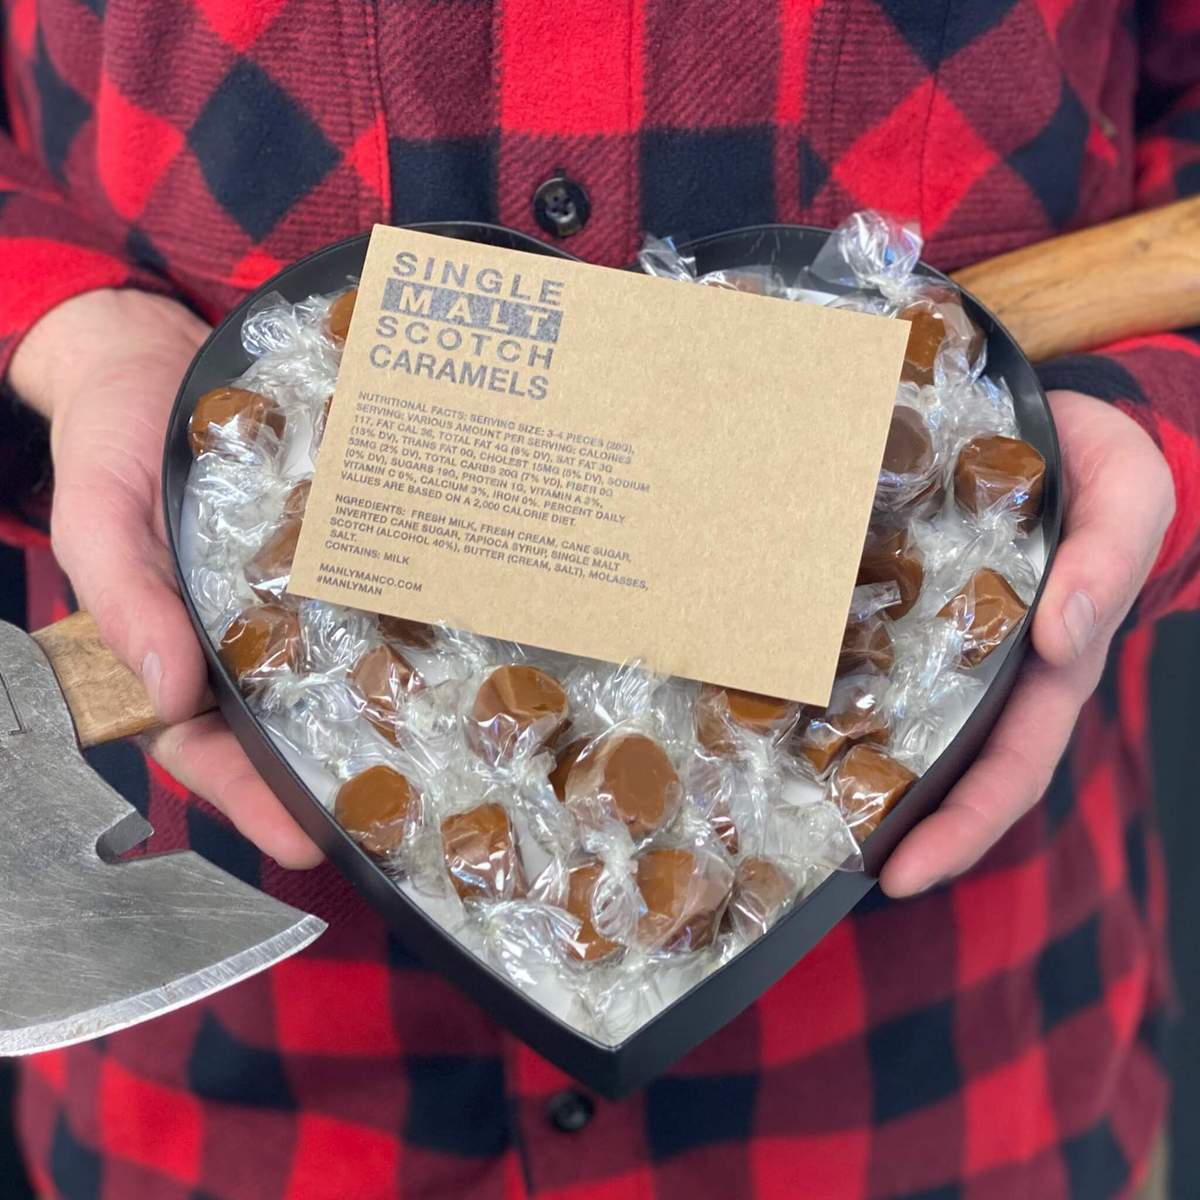 Heart-shaped box full of single malt scotch caramels, held by man in flannel shirt